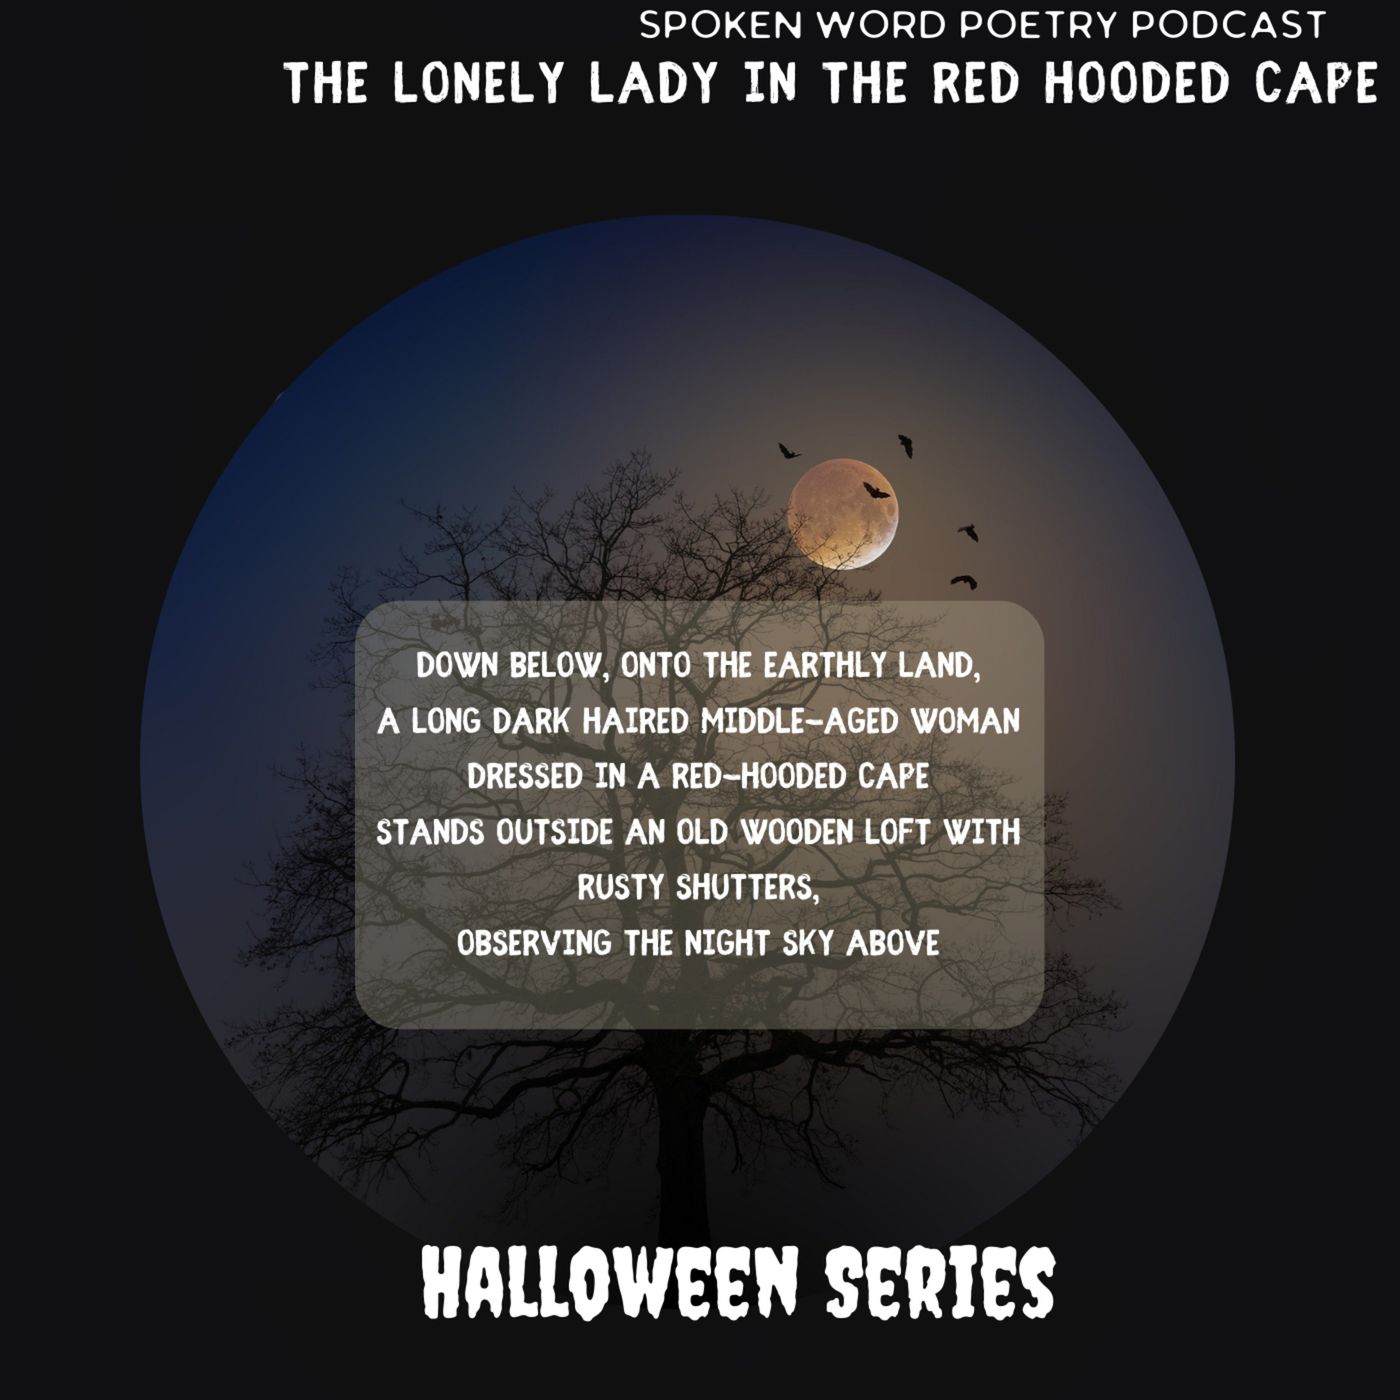 Spoken Word Poetry: Halloween Series: The Lonely Lady in the Red-Hooded Cape